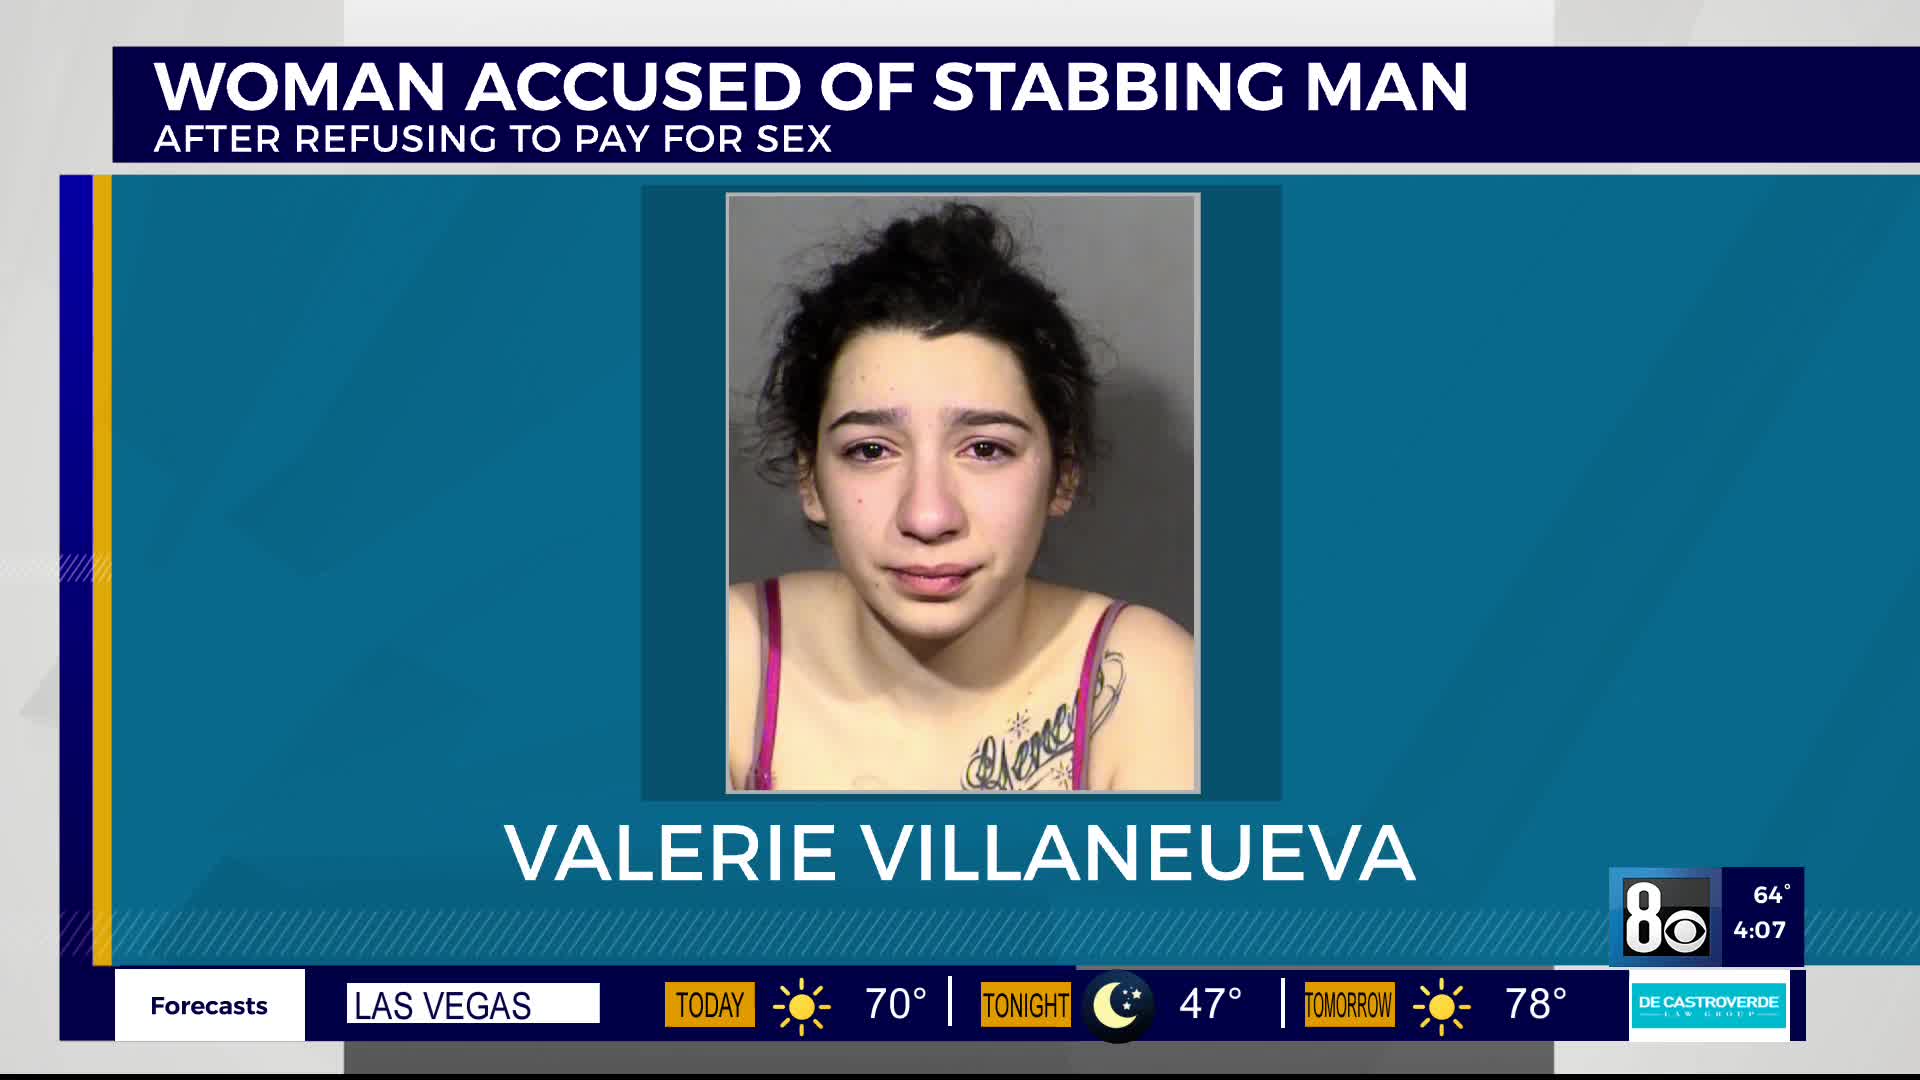 Las Vegas woman tries to kill man after he refuses to pay for sex, police picture